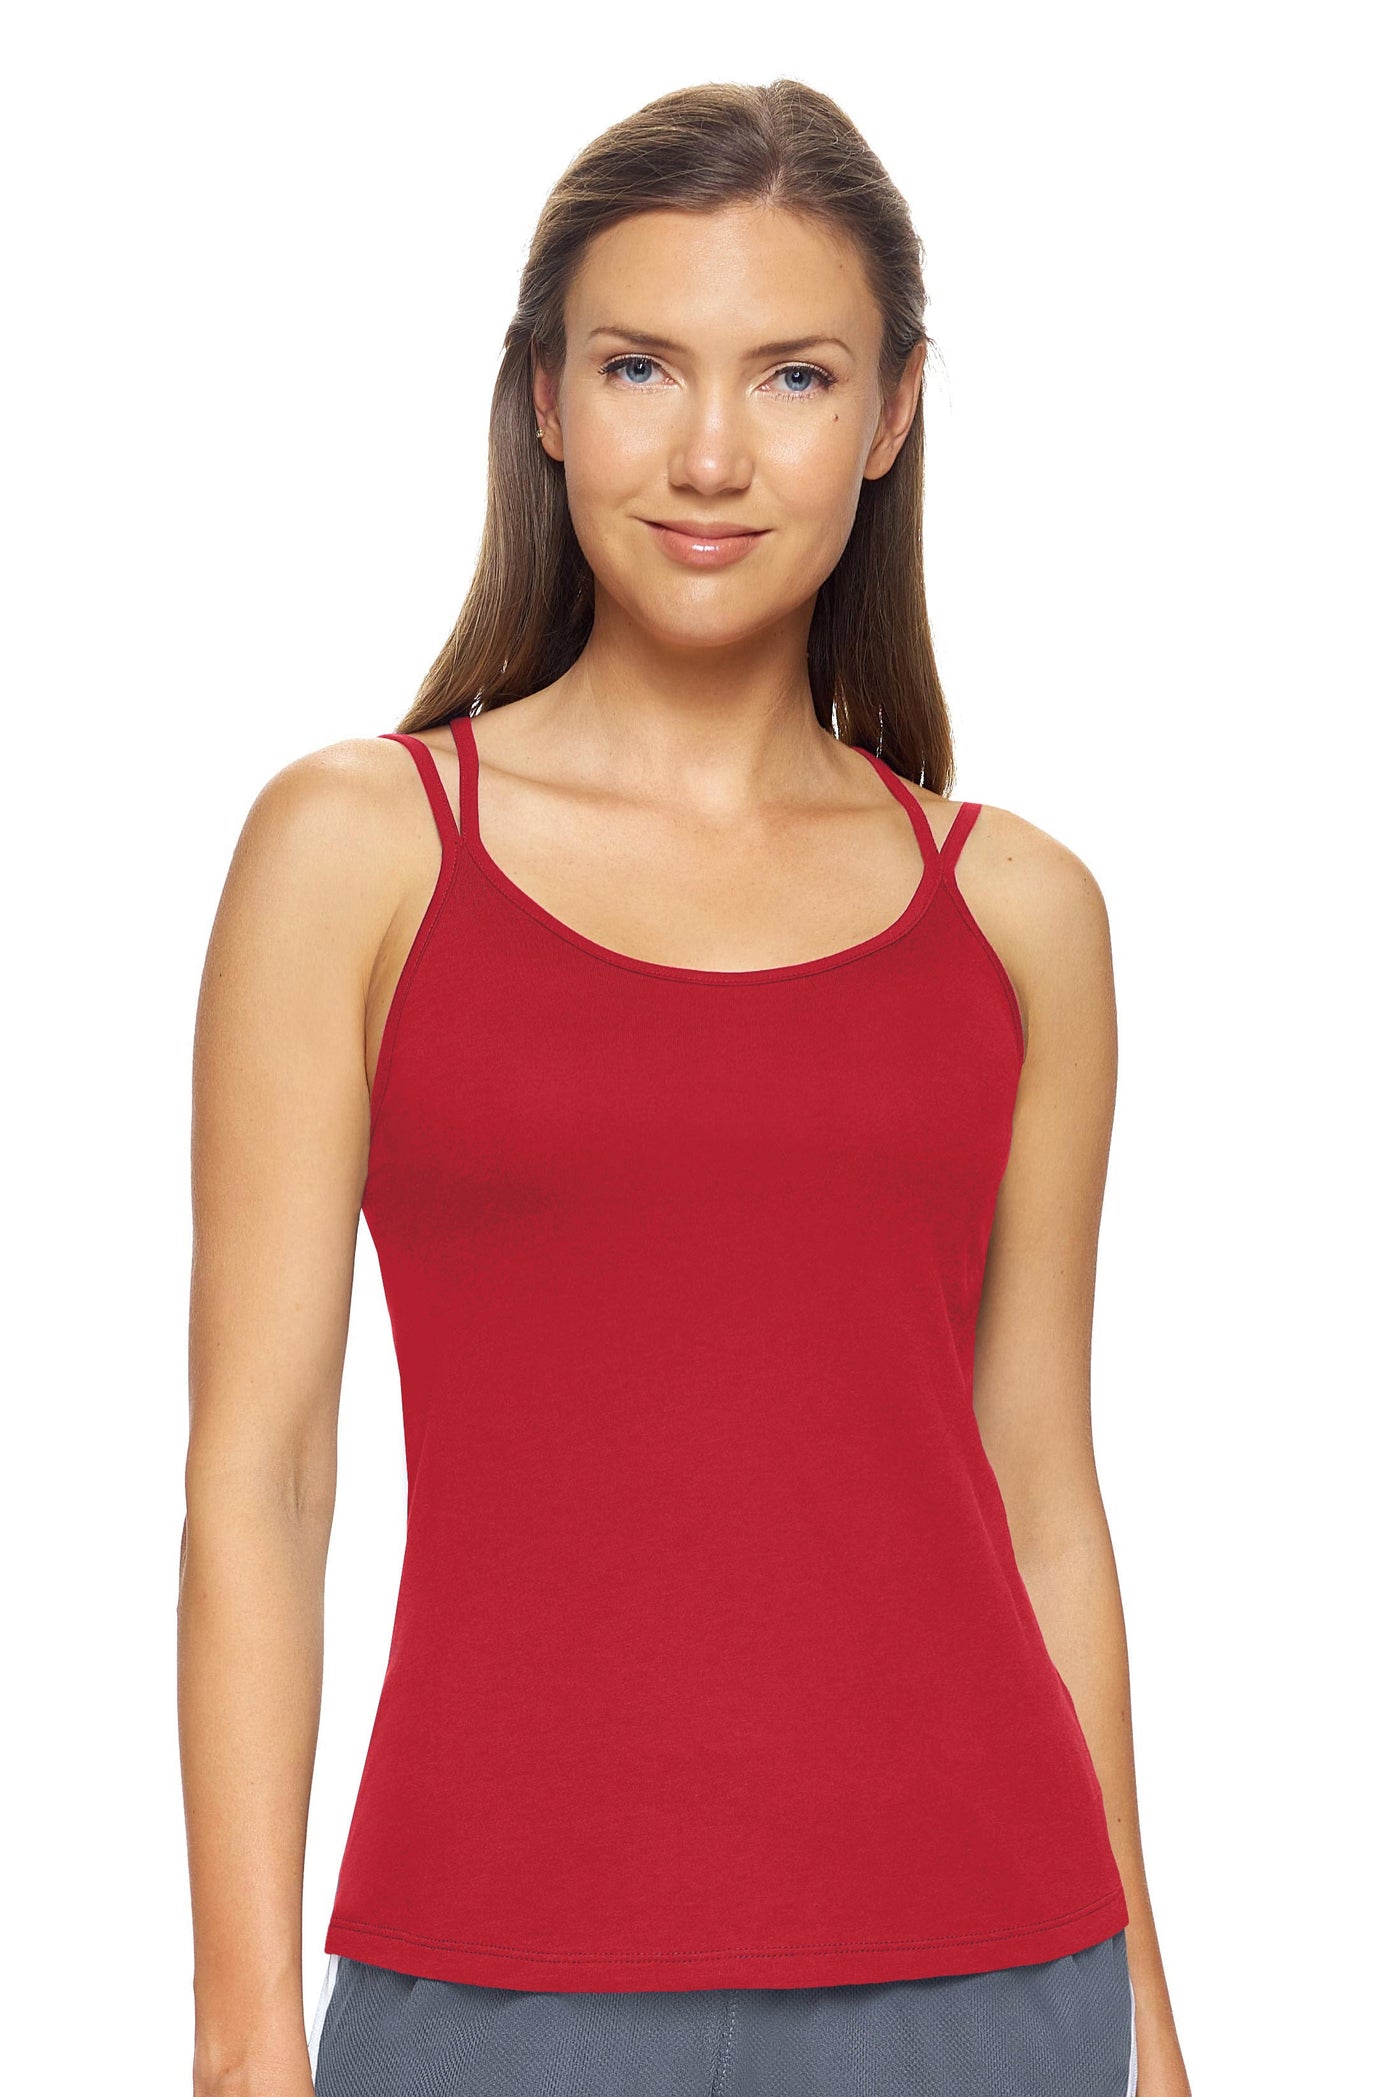 Expert Brand Retail Women's Modal Cotton Made in USA MoCA™ Strappy Cami in scarlet#color_scarlet